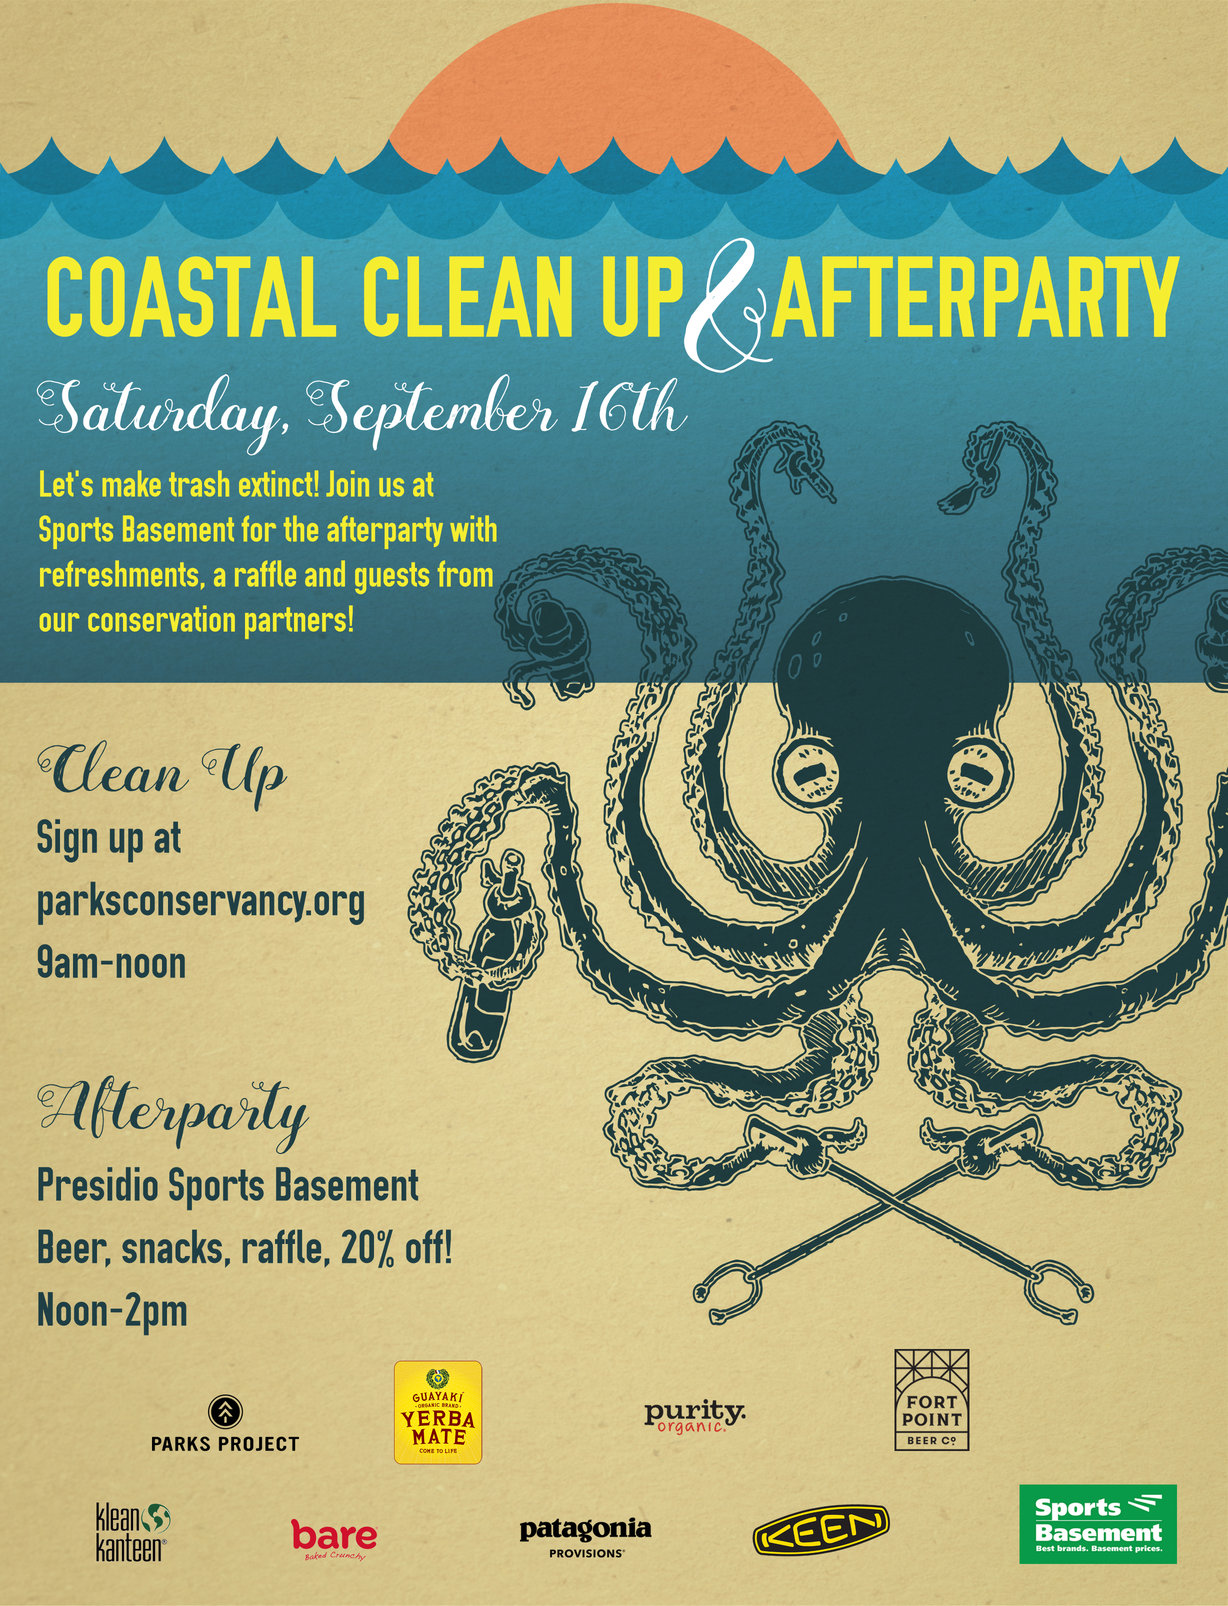 SB Team Coastal Clean Up Afterparty Tickets Sat Sep 16 2017